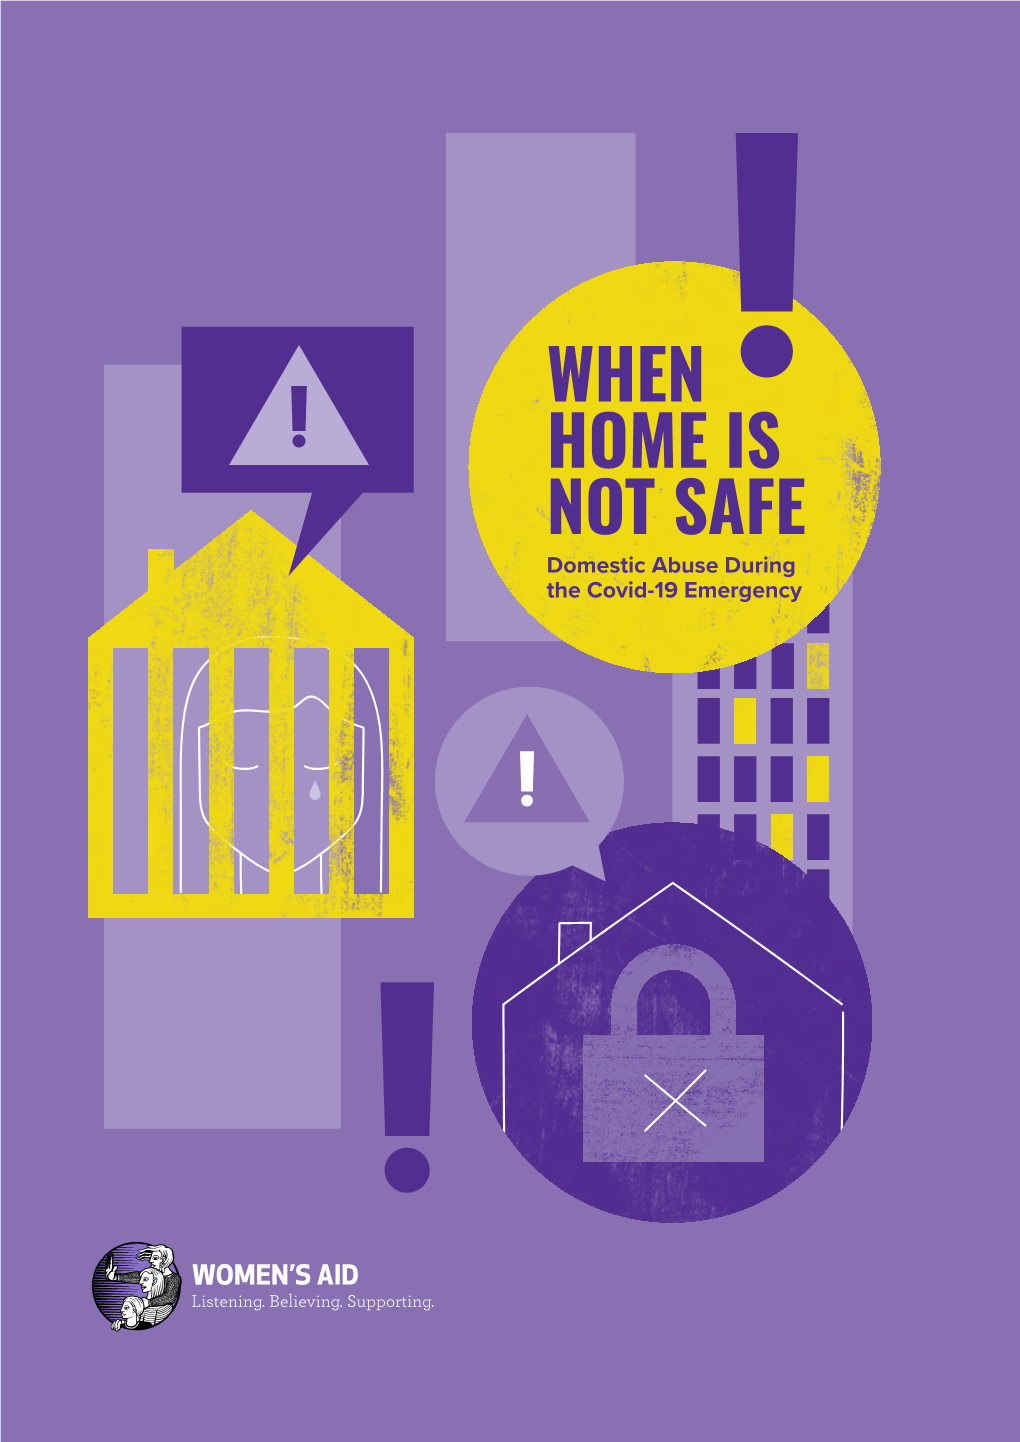 WHEN HOME IS NOT SAFE Domestic Abuse During the Covid-19 Emergency CEO INTRODUCTION Highlighting the Safety of Home Has Been Paramount During the Covid-19 Emergency